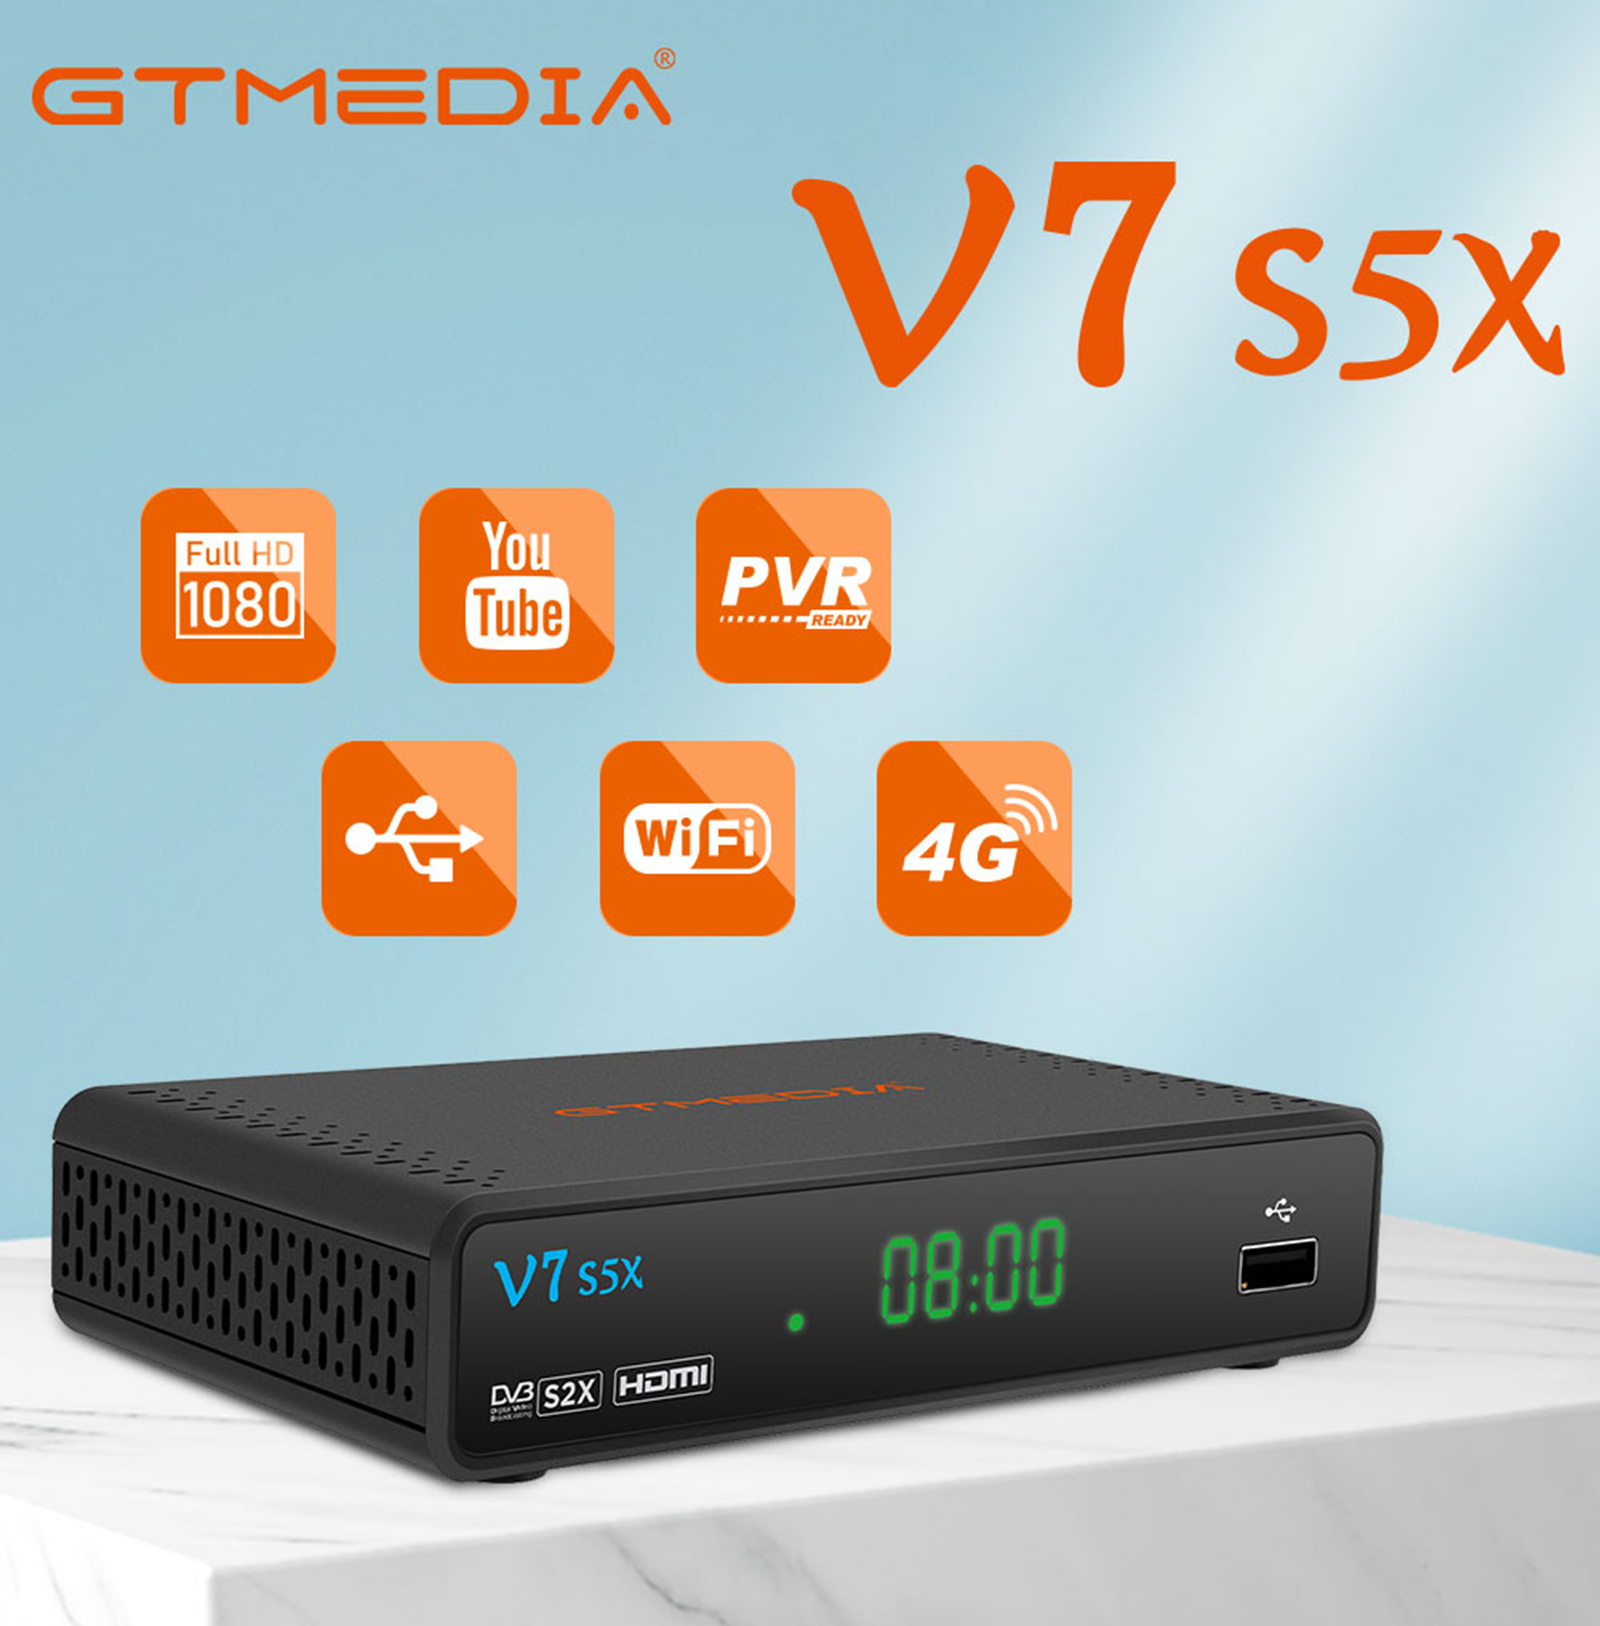 GTMEDIA-V7-S5X-DVB-S-DVB-S2-S2X-H265-1080P-HD-Satellite-TV-Receiver-Decoder-Set-Top-Box-with-USB-WIF-1930174-1